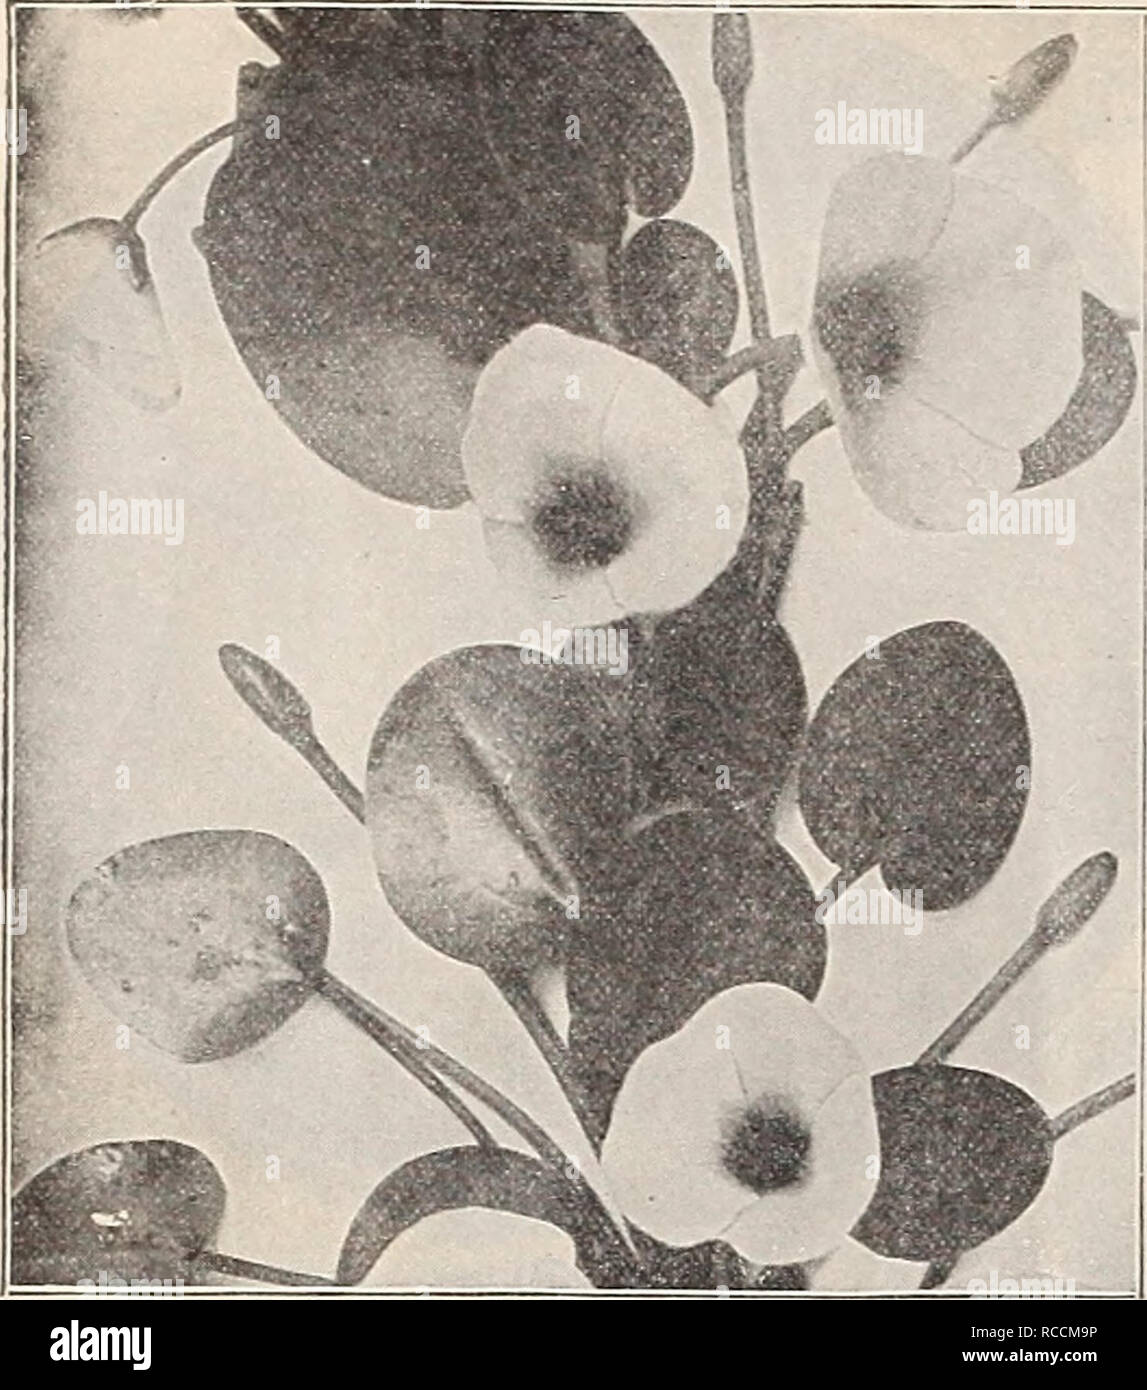 . Dreer's 1909 garden book. Seeds Catalogs; Nursery stock Catalogs; Gardening Equipment and supplies Catalogs; Flowers Seeds Catalogs; Vegetables Seeds Catalogs; Fruit Seeds Catalogs. 242 ! HENETA DREERfflllAKLPHIAfAW/WATER LILIES™ AQUATICS. LlMNOCHARIS HUMBOLDTI (WaTEH POPPY). (Offered on next Page.) Miscellaneous Aquatics, Varieties marked * are hardy. * Acorus Japonica Variegata ( Variegated Sweet Flag) One of the finest variegated plants in cultivation. 25 cts. each ; §2.50 per doz. * — GramineuS Variegatus. Dwarf-growing with leathery leaves, beautifully margined with white; handsome plan Stock Photo